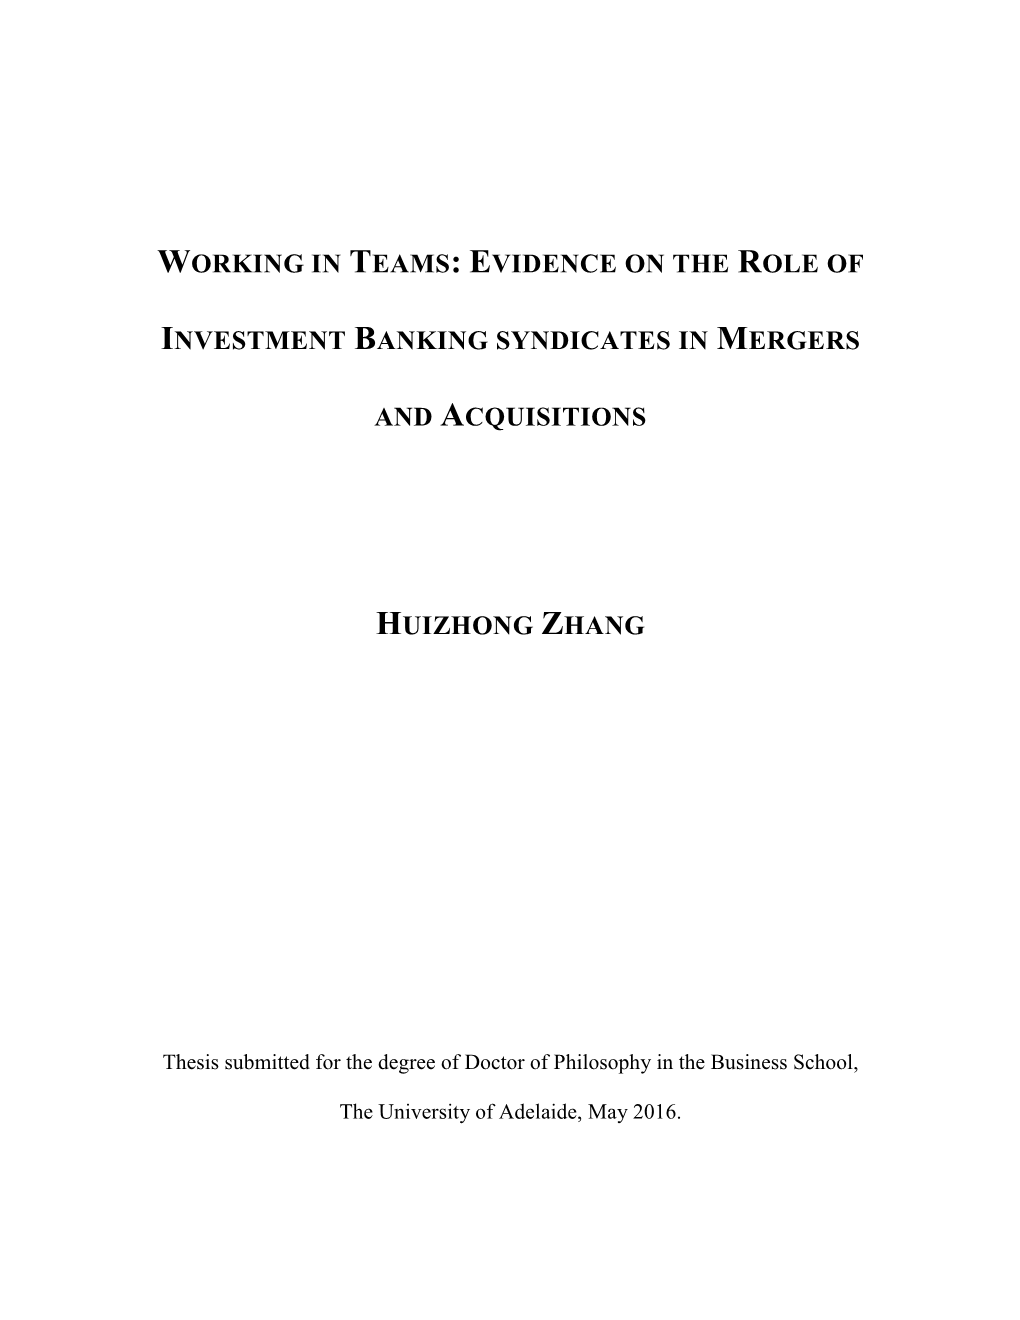 Evidence on the Role of Investment Banking Syndicates in Mergers And